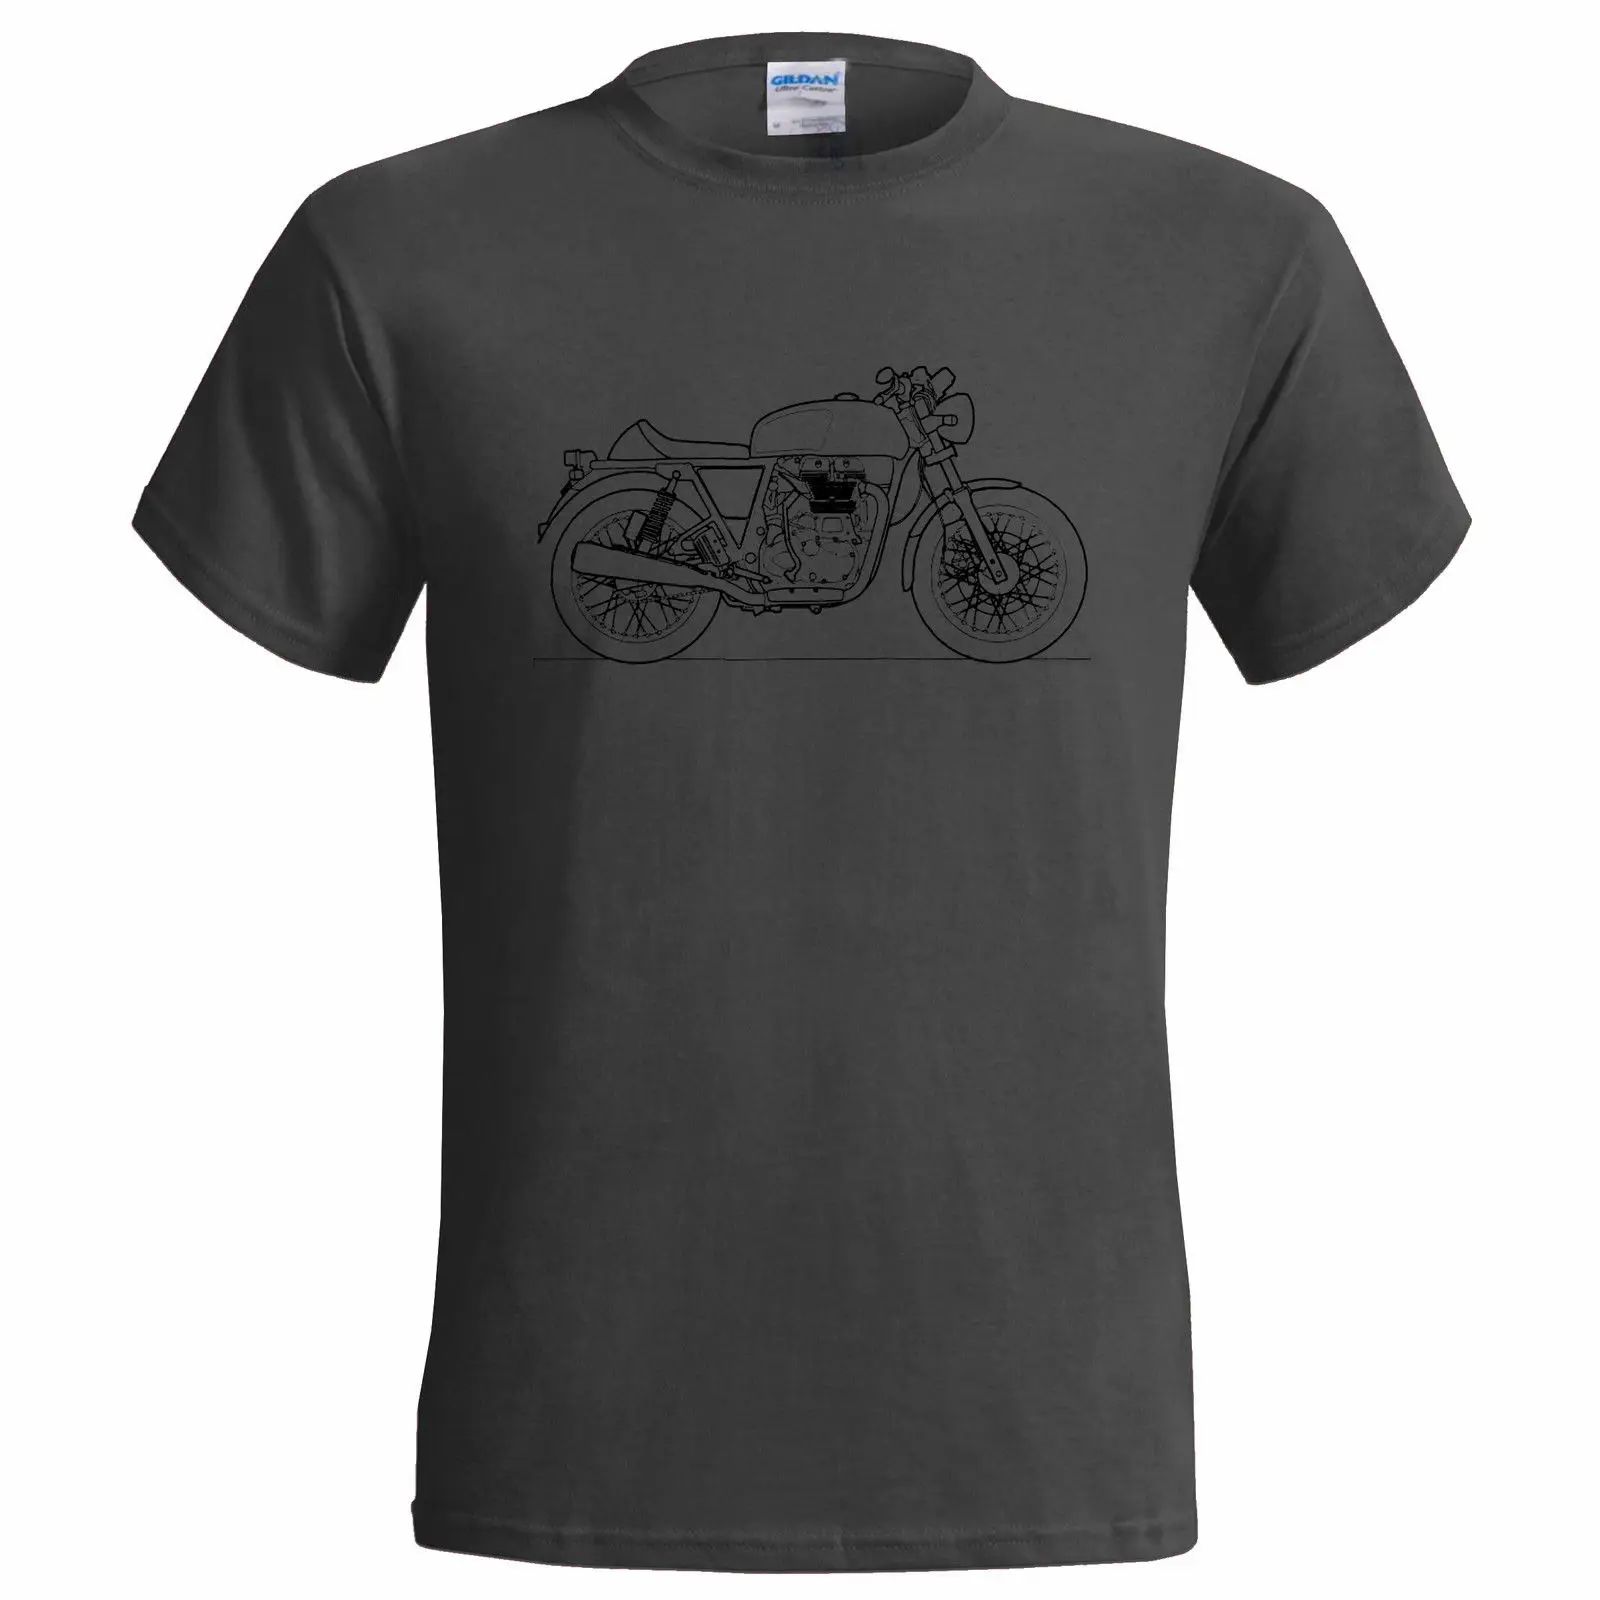 

Unofficial Stencil of a ROYAL ENFIELD CONTINENTAL GT MENS T SHIRT MOTORBIKE BIKE 100% cotton tee shirt, tops wholesale tee